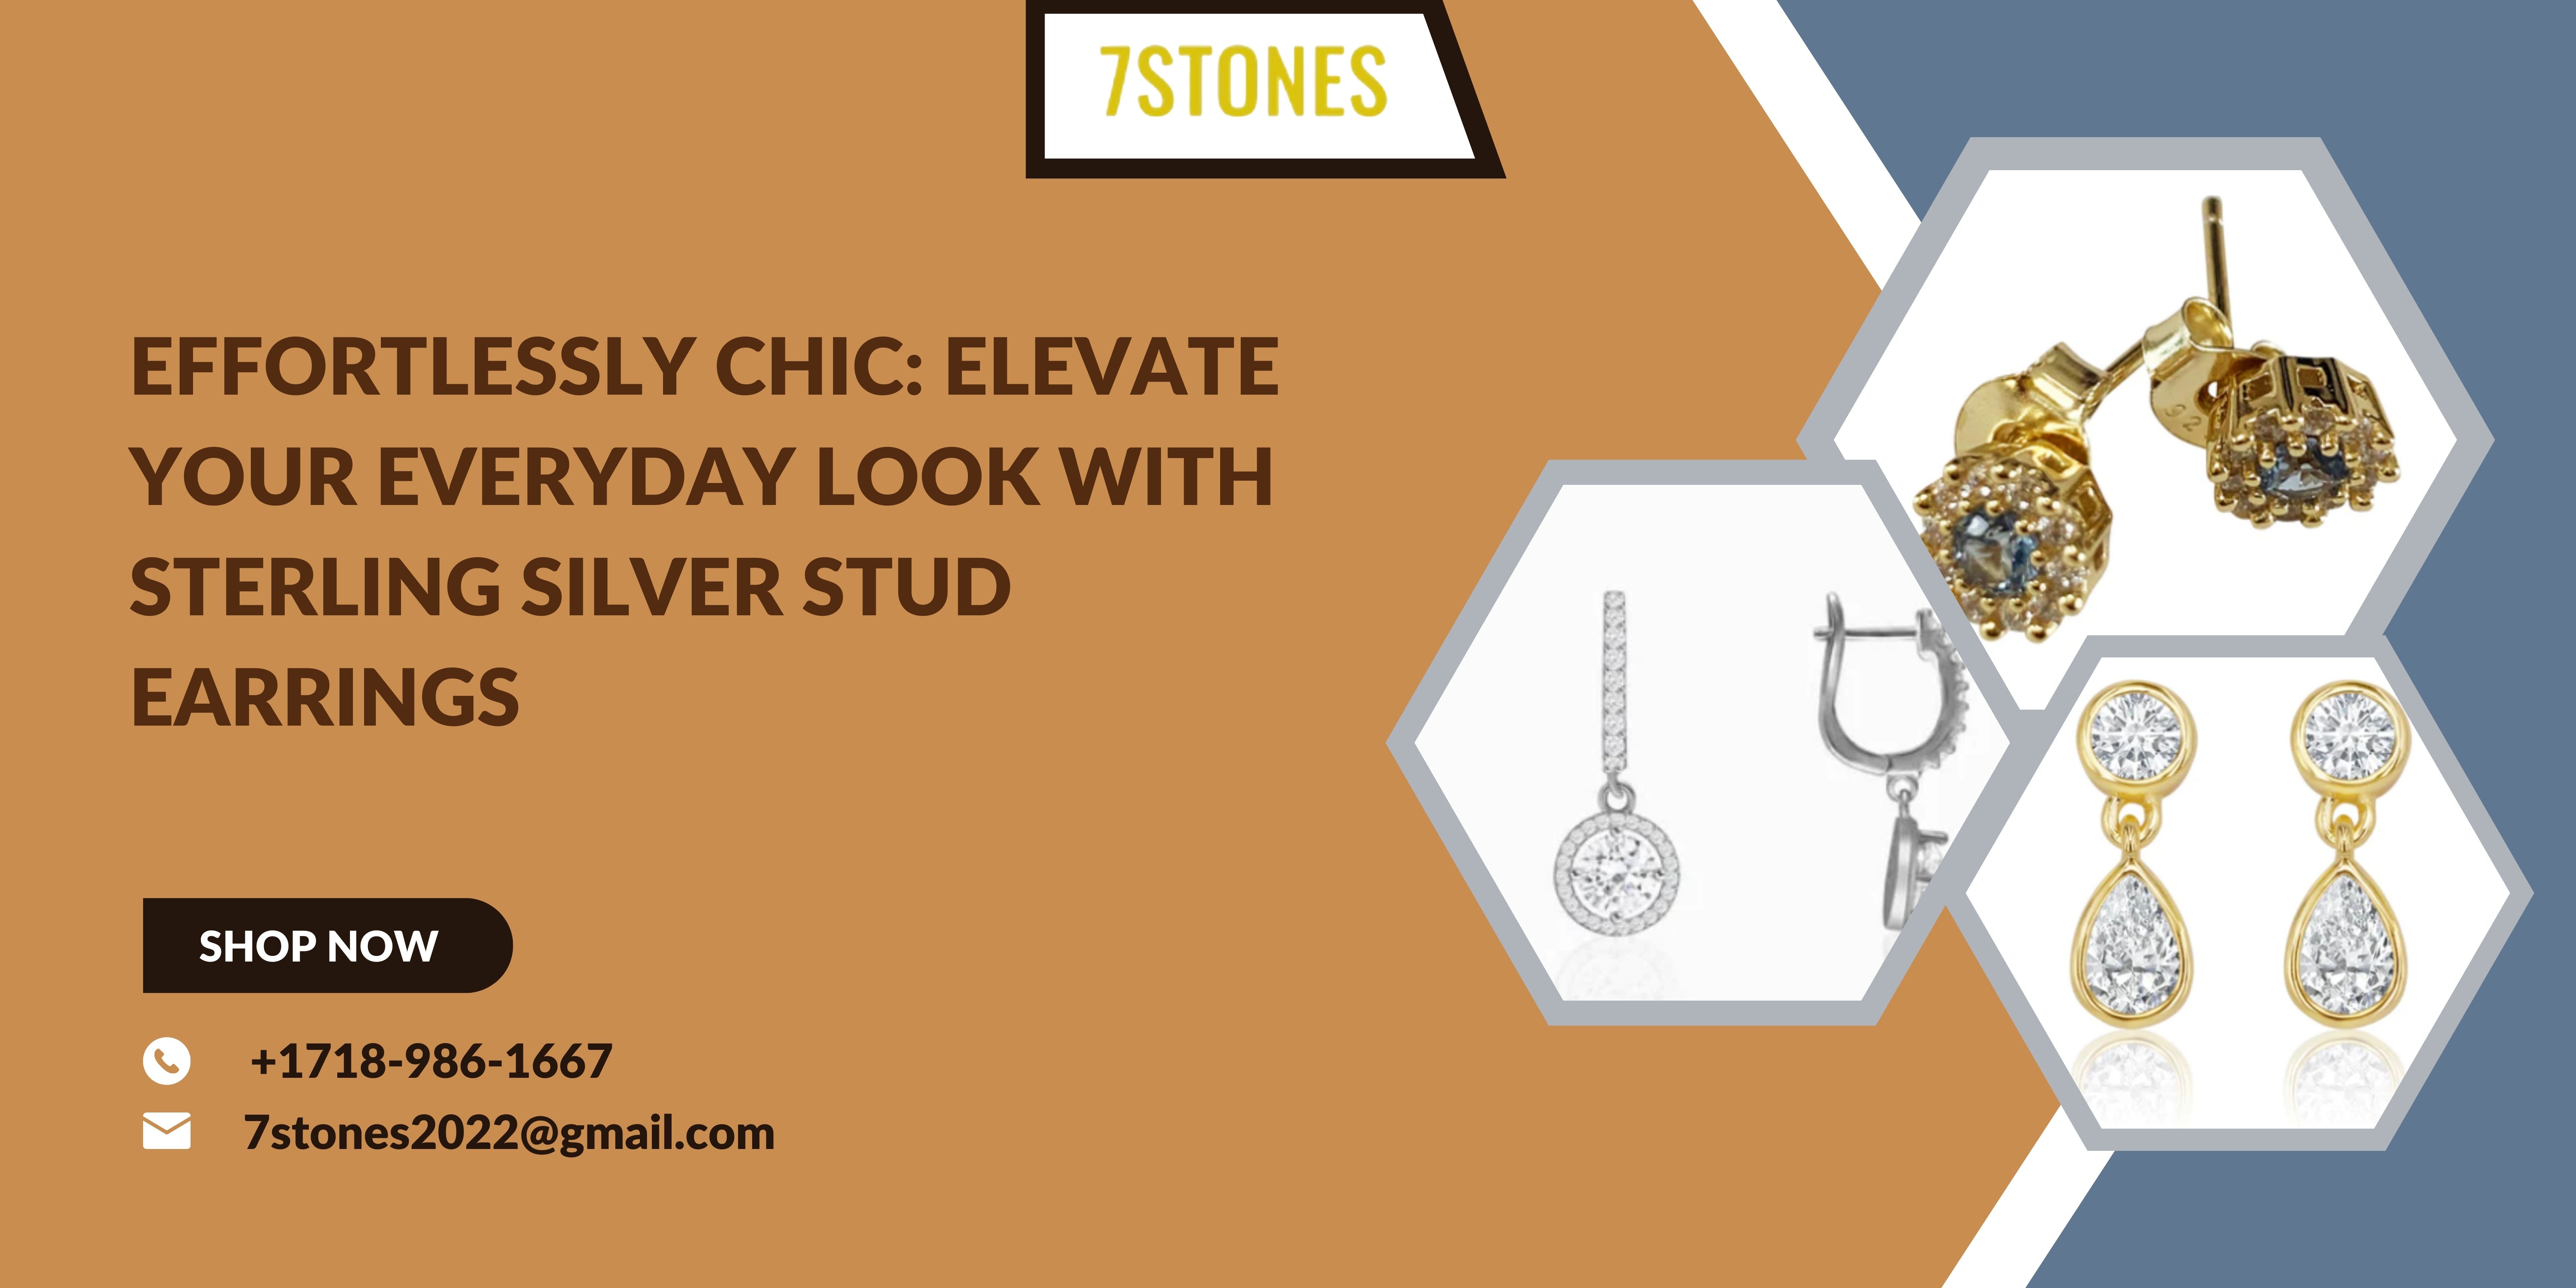 Effortlessly Chic: Elevate Your Everyday Look with Sterling Silver Stud Earrings | Styled